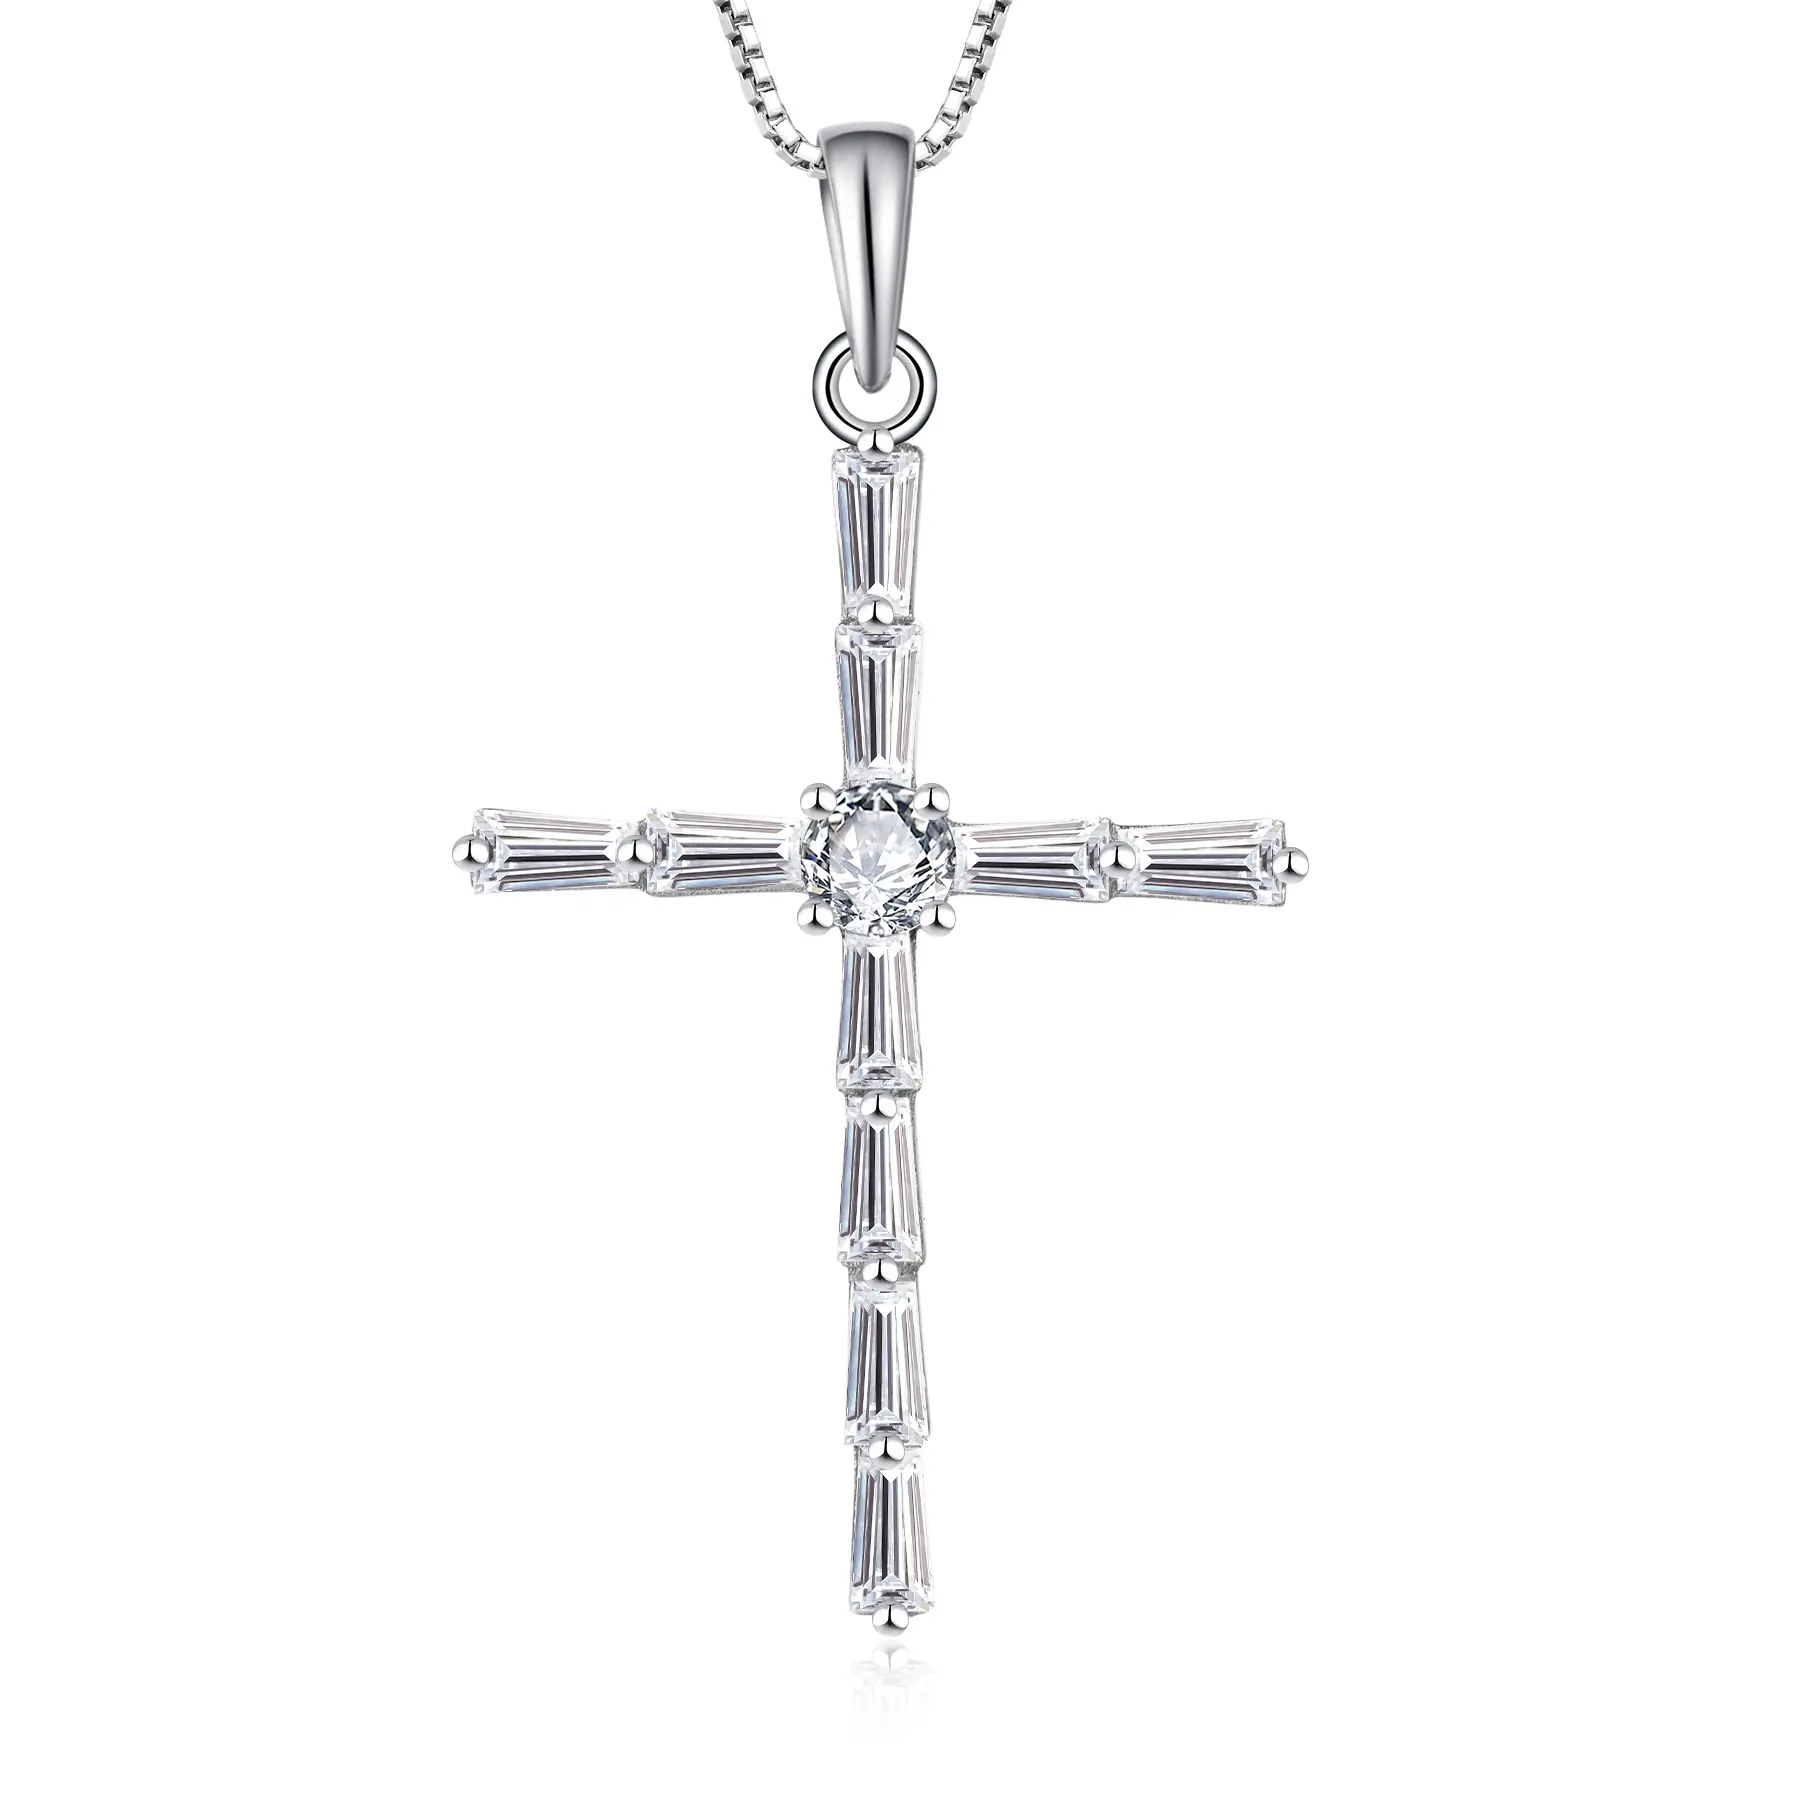 Christian Religious Charm 925 silver baguette stone cross pendant fashion crystal necklace